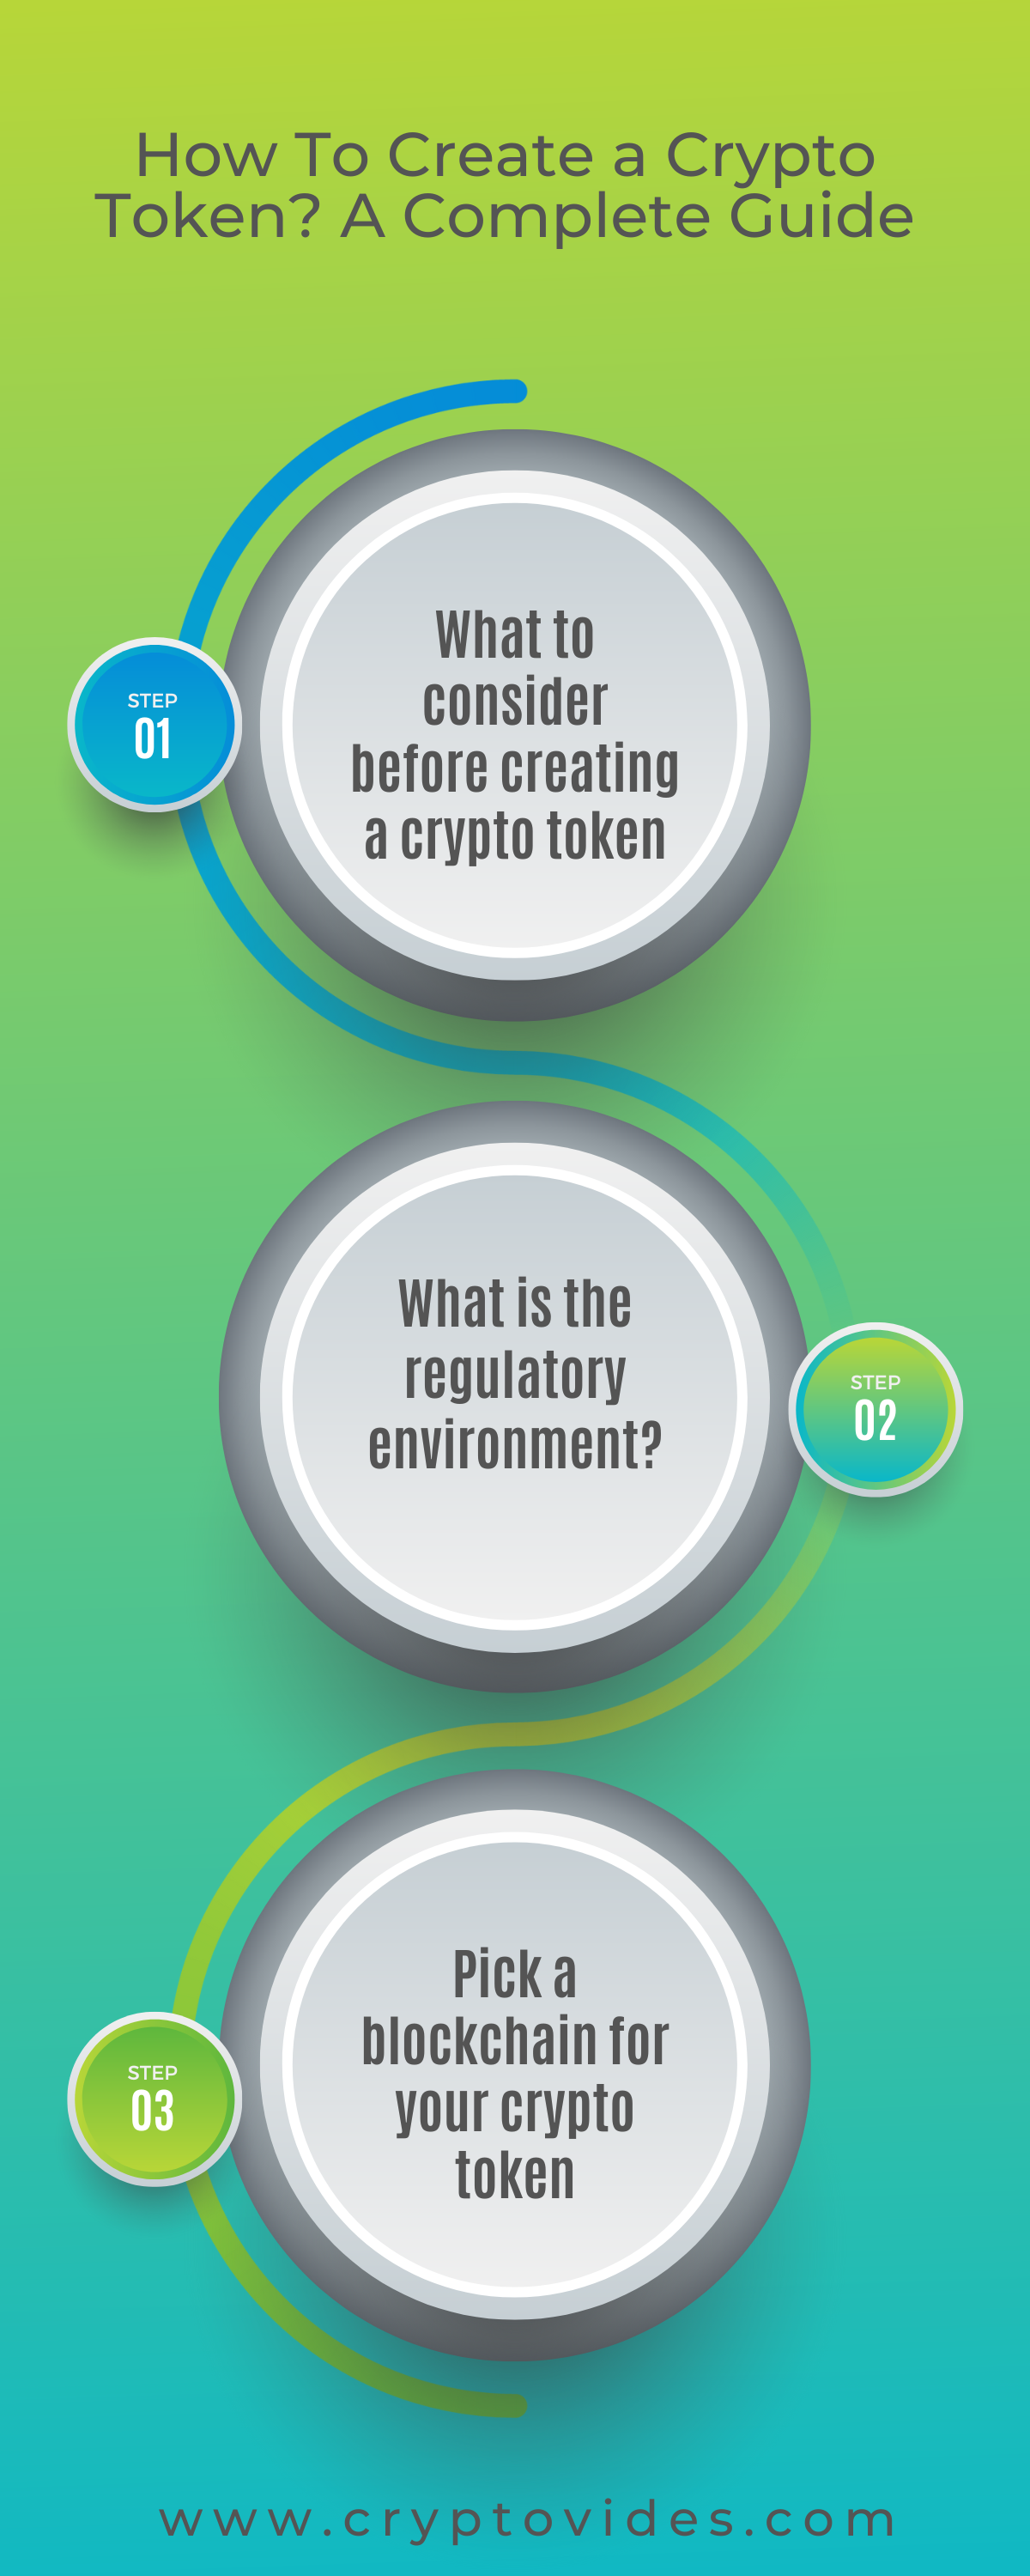 How To Create a Crypto Token? A Complete Guide